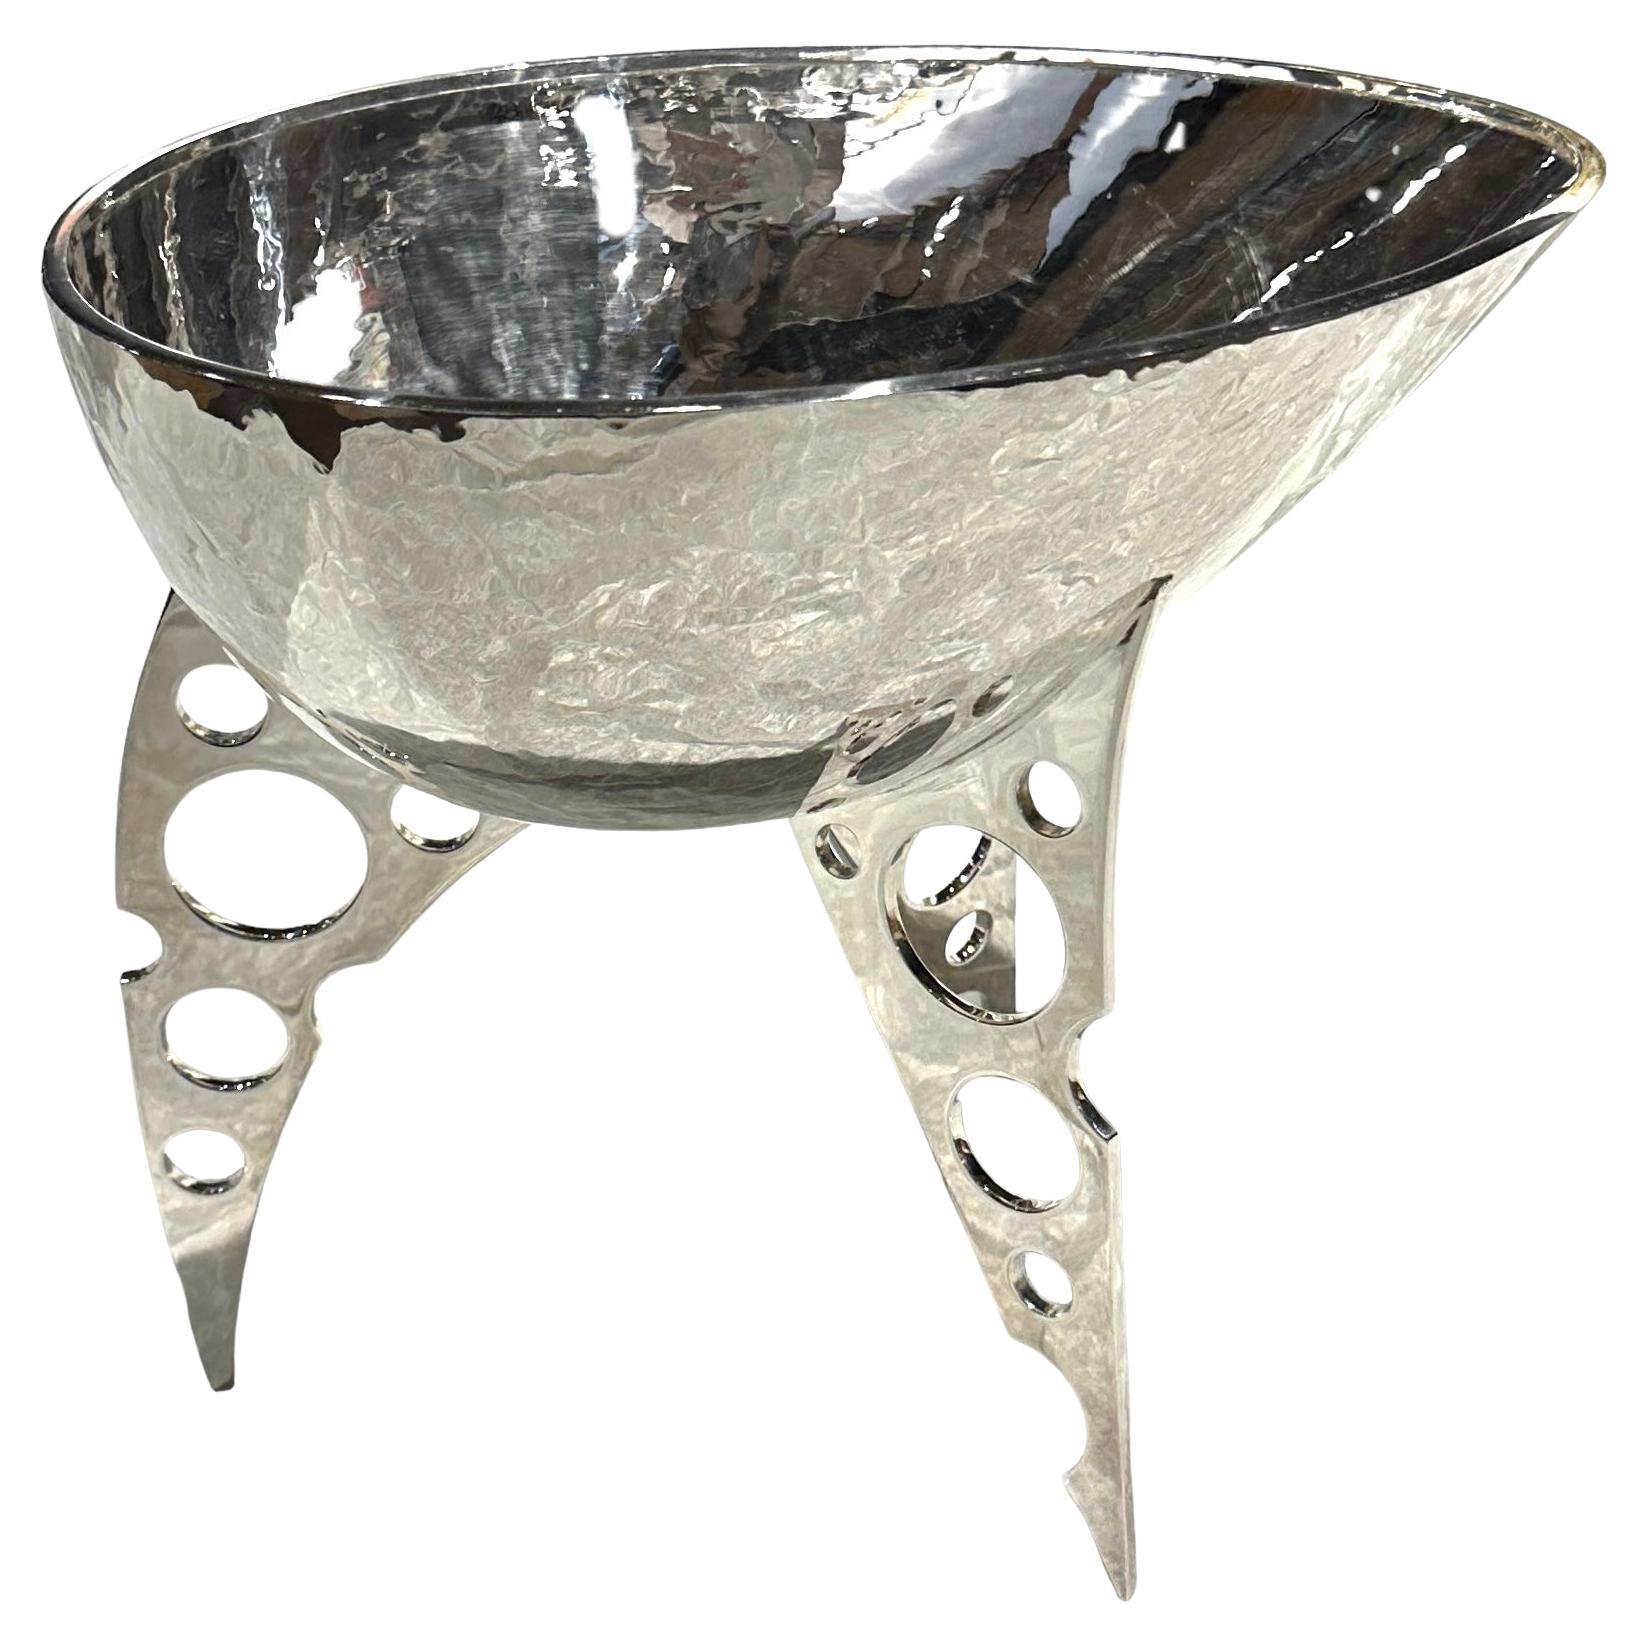 Organic and industrial shapes fuse in this inverted and fierce warrior helmet of the Norse warlord.  Playfully malevolent tension -arrests the bowl atop the dagger like legs.  This minimalist design and natural form made of  silver is both beautiful